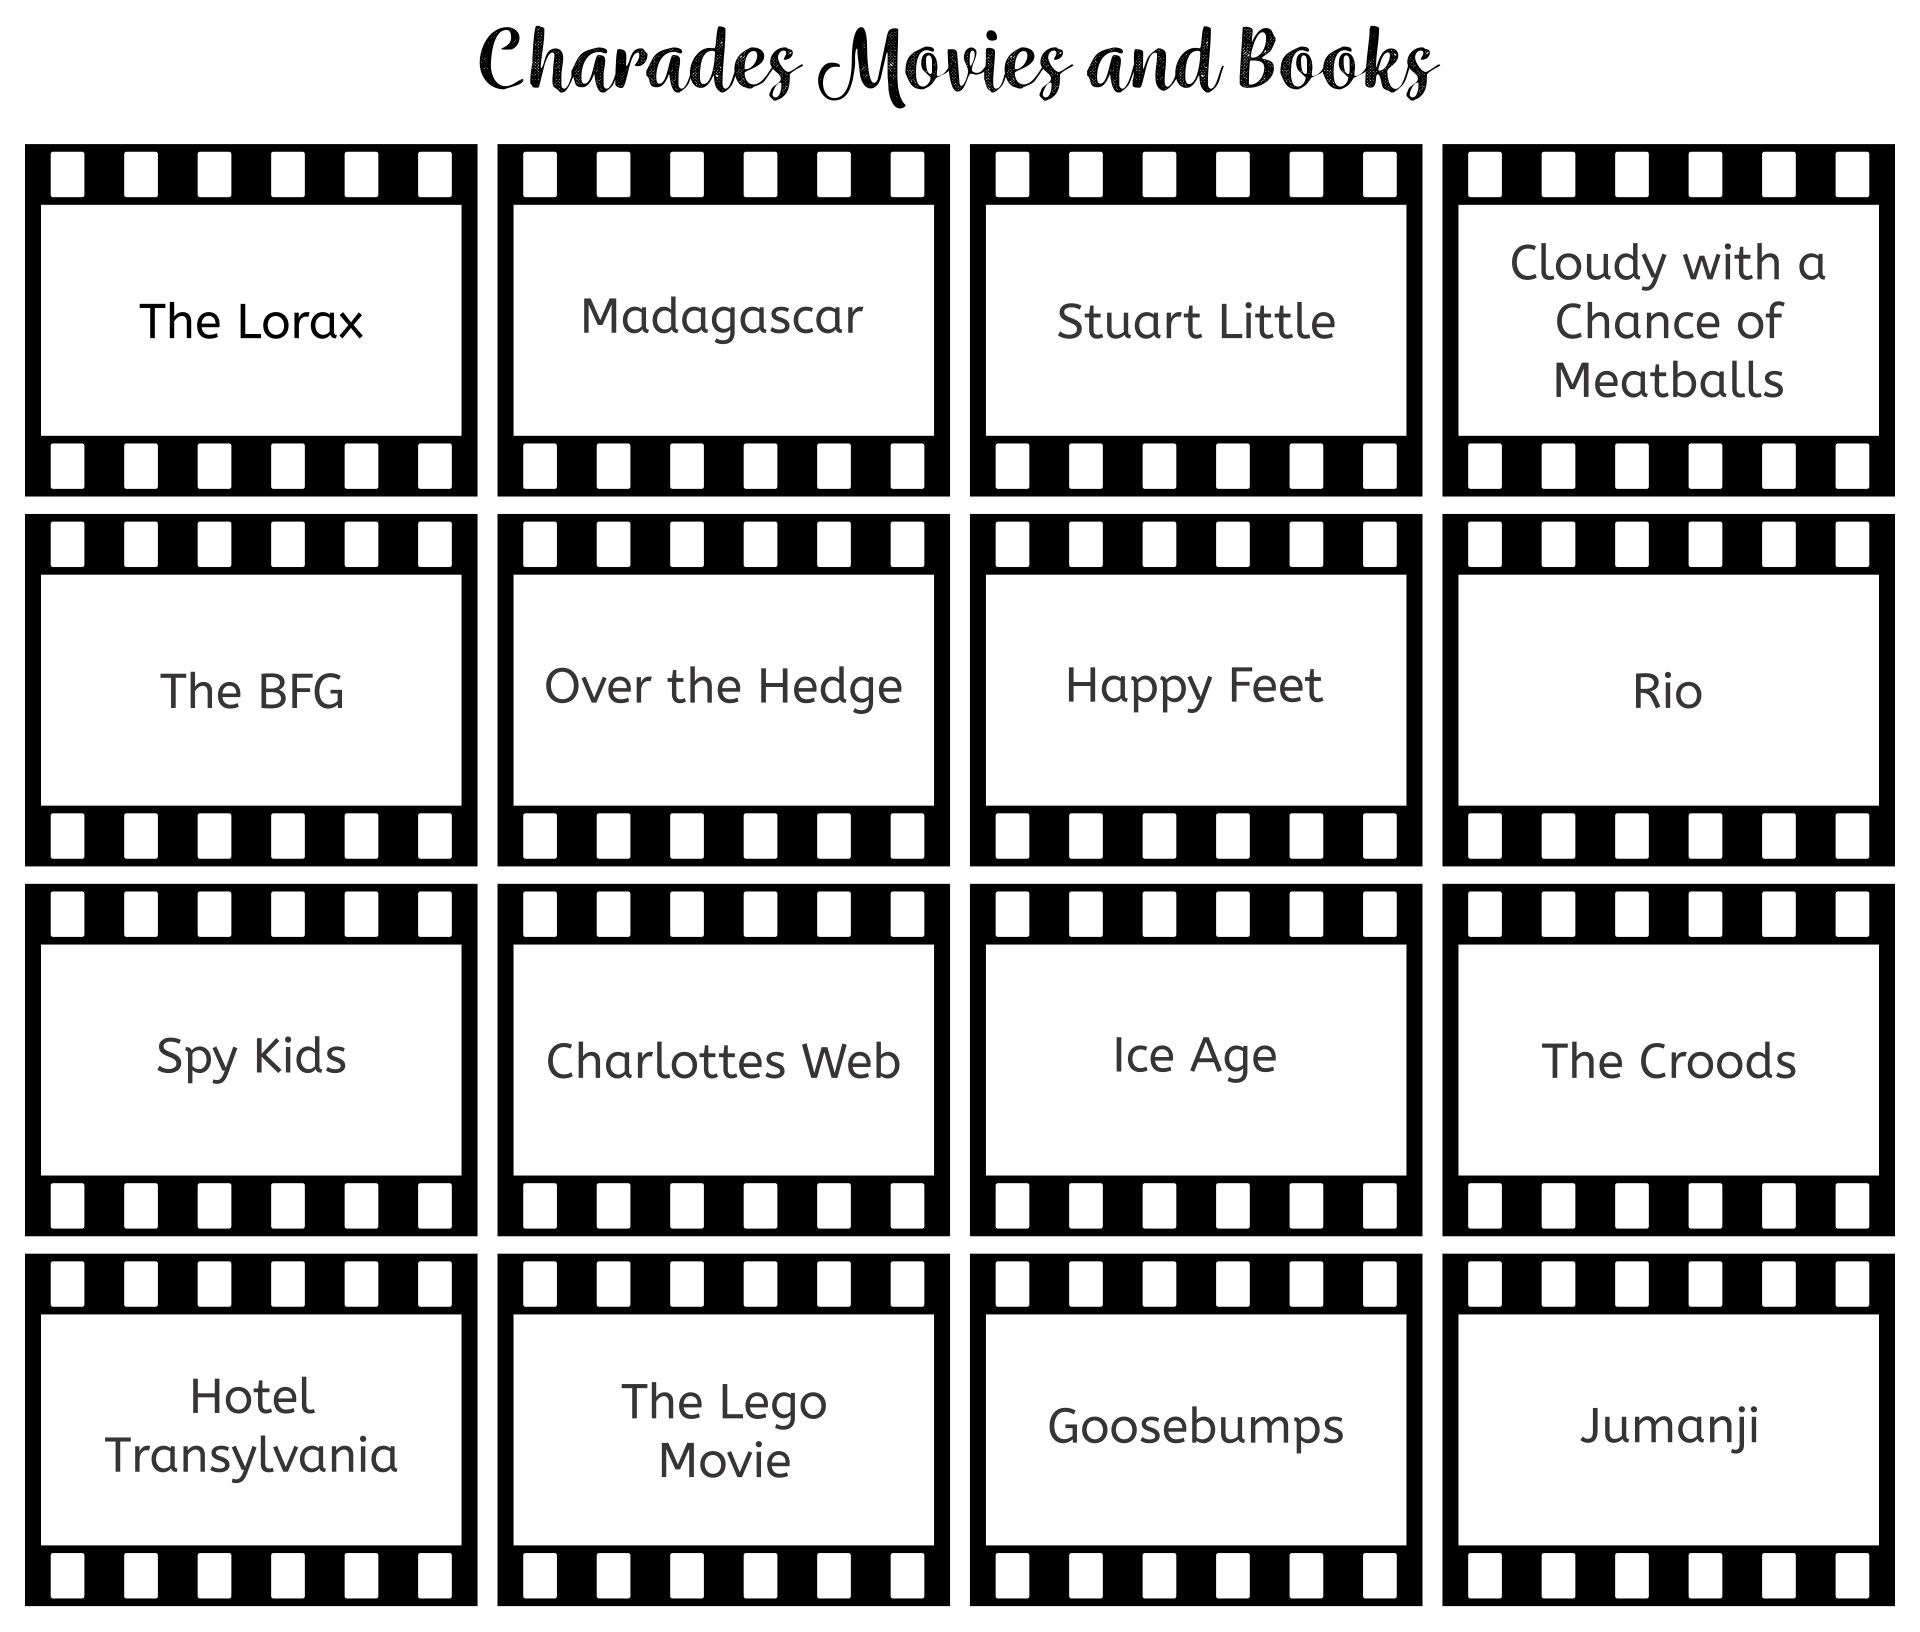 10-best-printable-charades-movie-lists-pdf-for-free-at-printablee